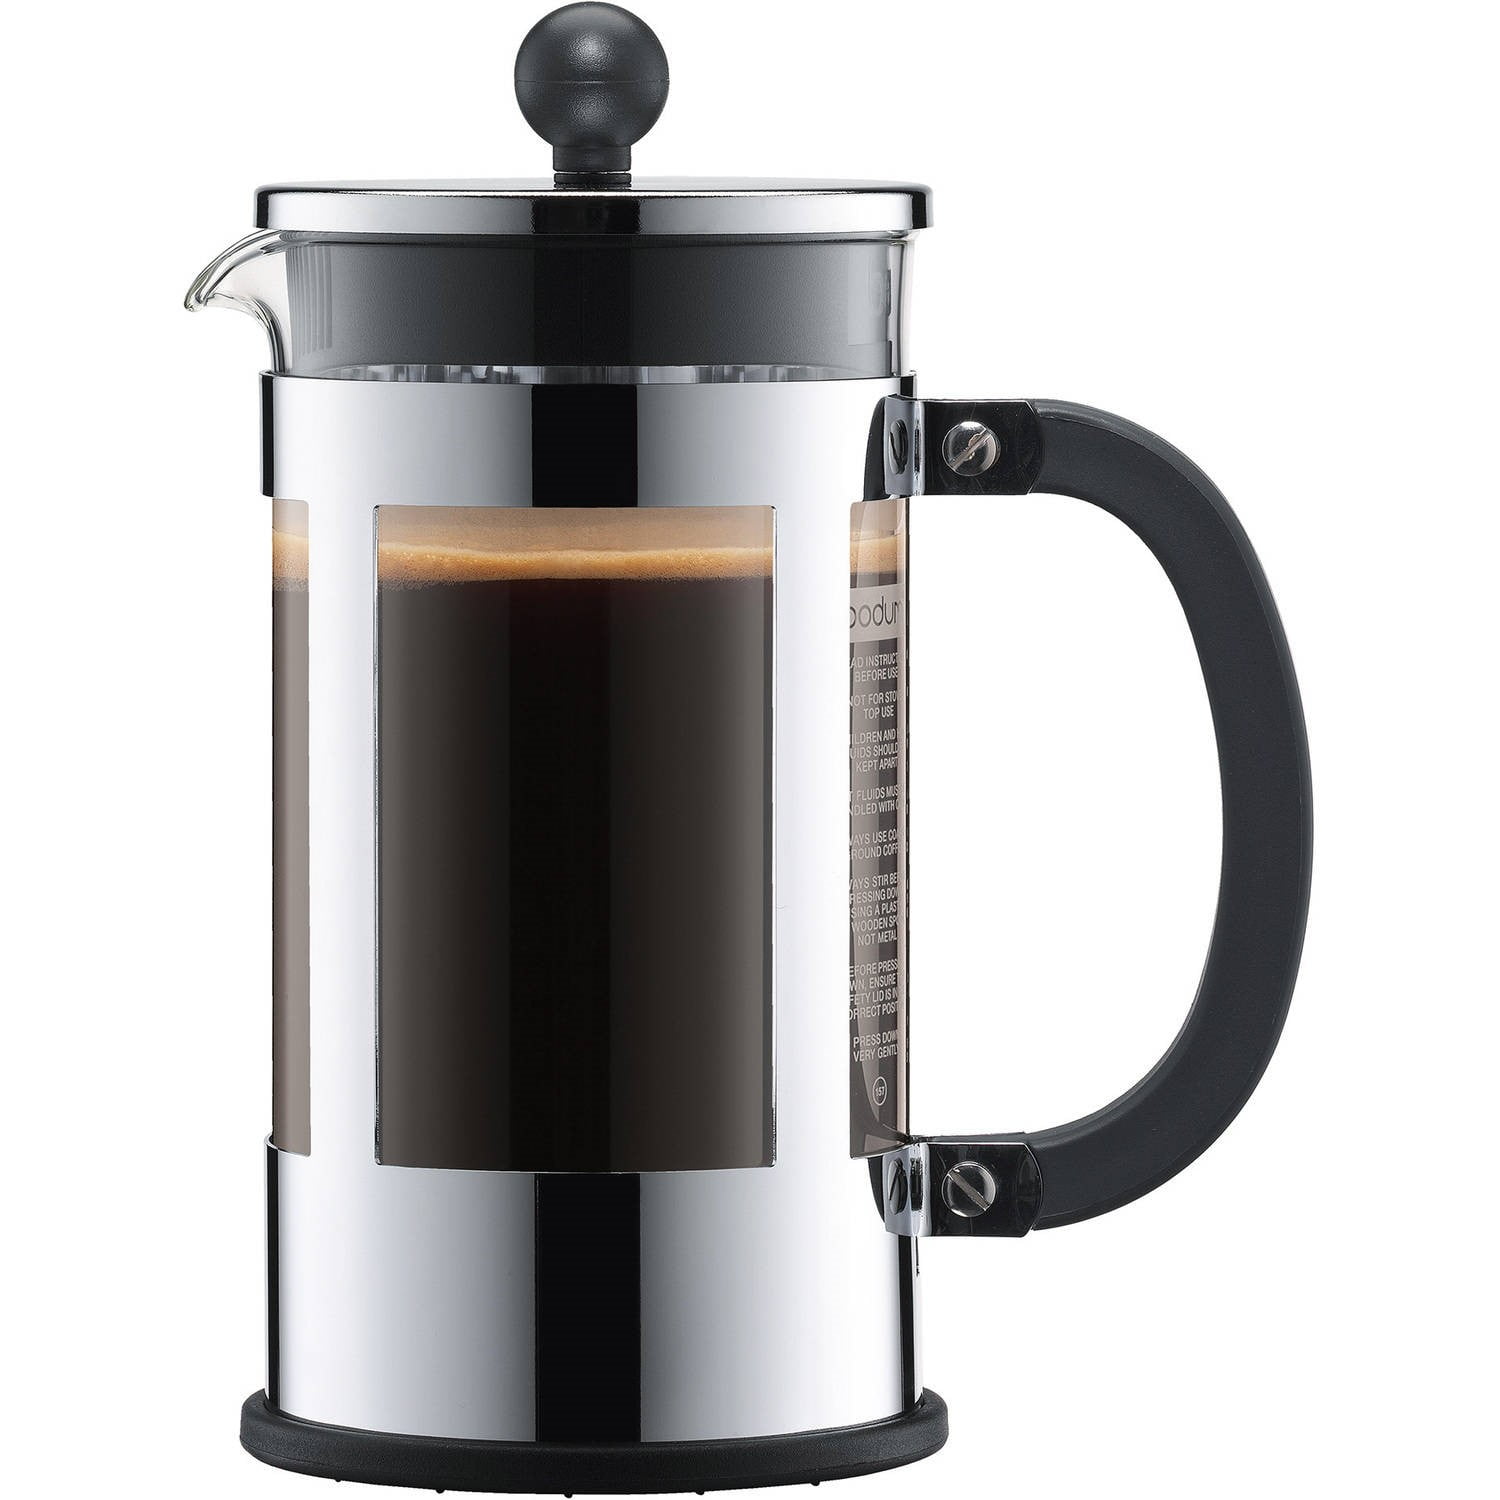 BODUM Kenya French Press Coffee Maker, 34 Ounce, Stainless Steel